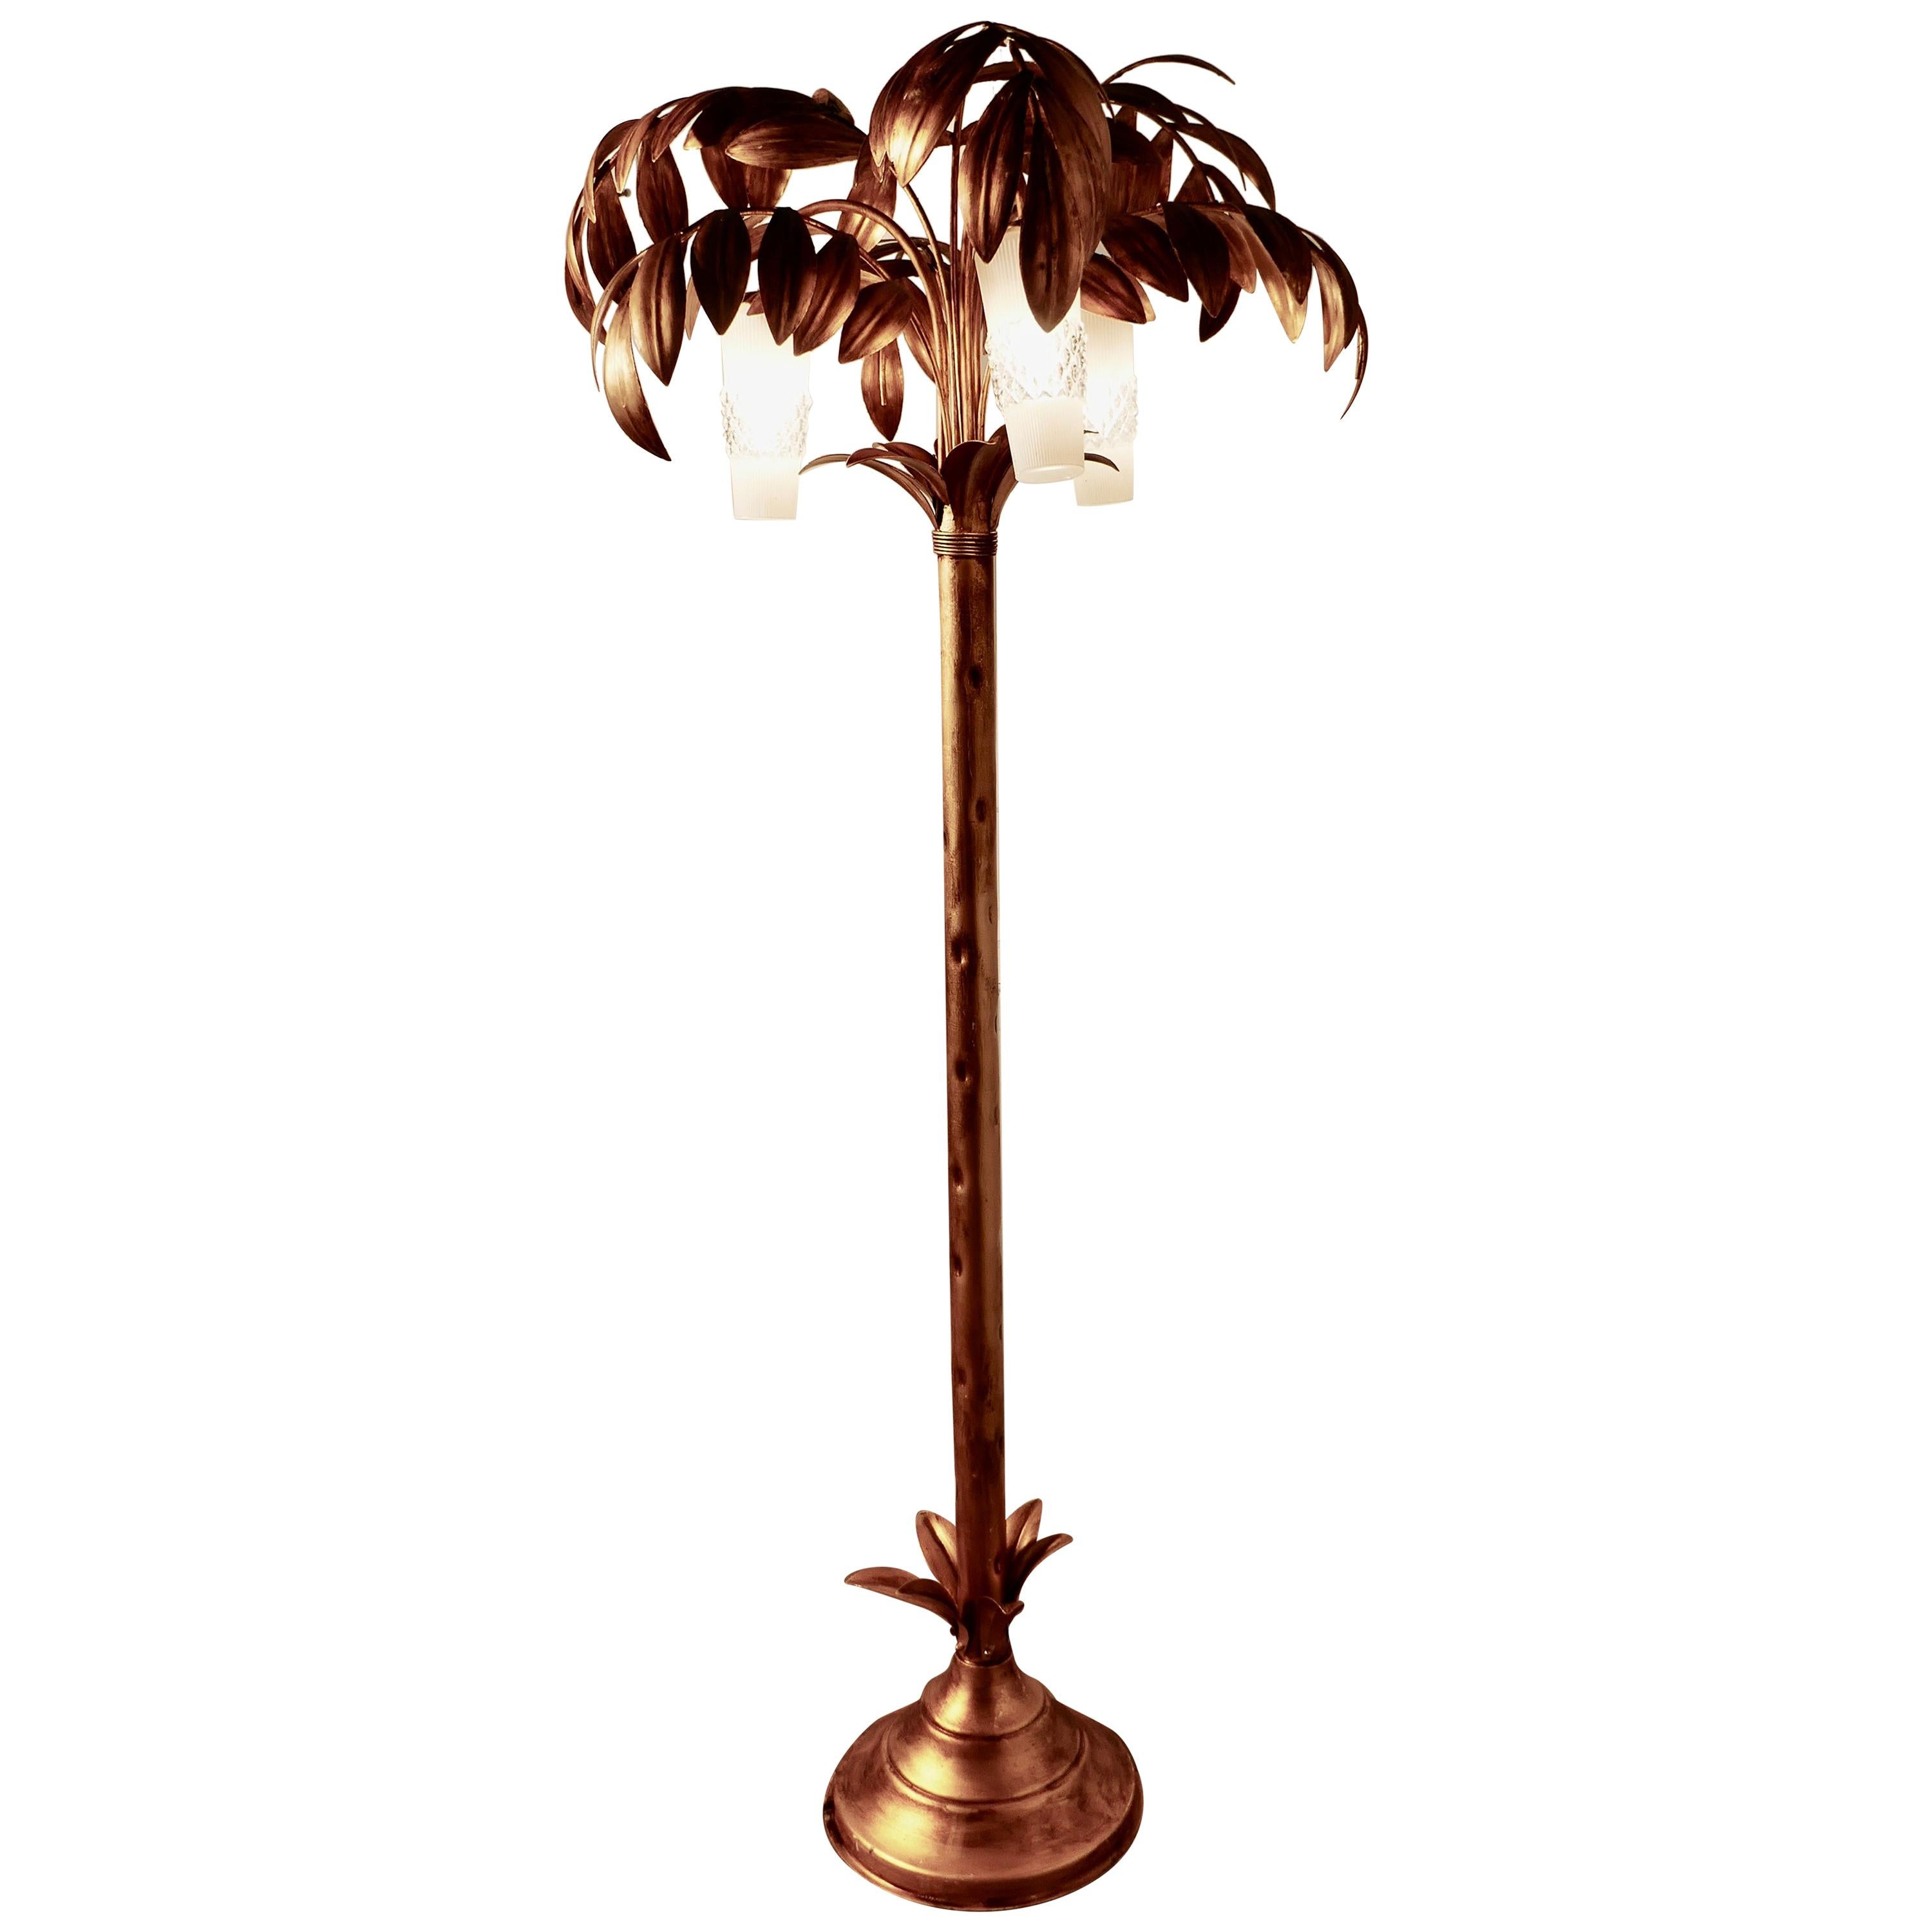 French Art Deco Gold Palm Leaf Toleware Floor Lamp For Sale